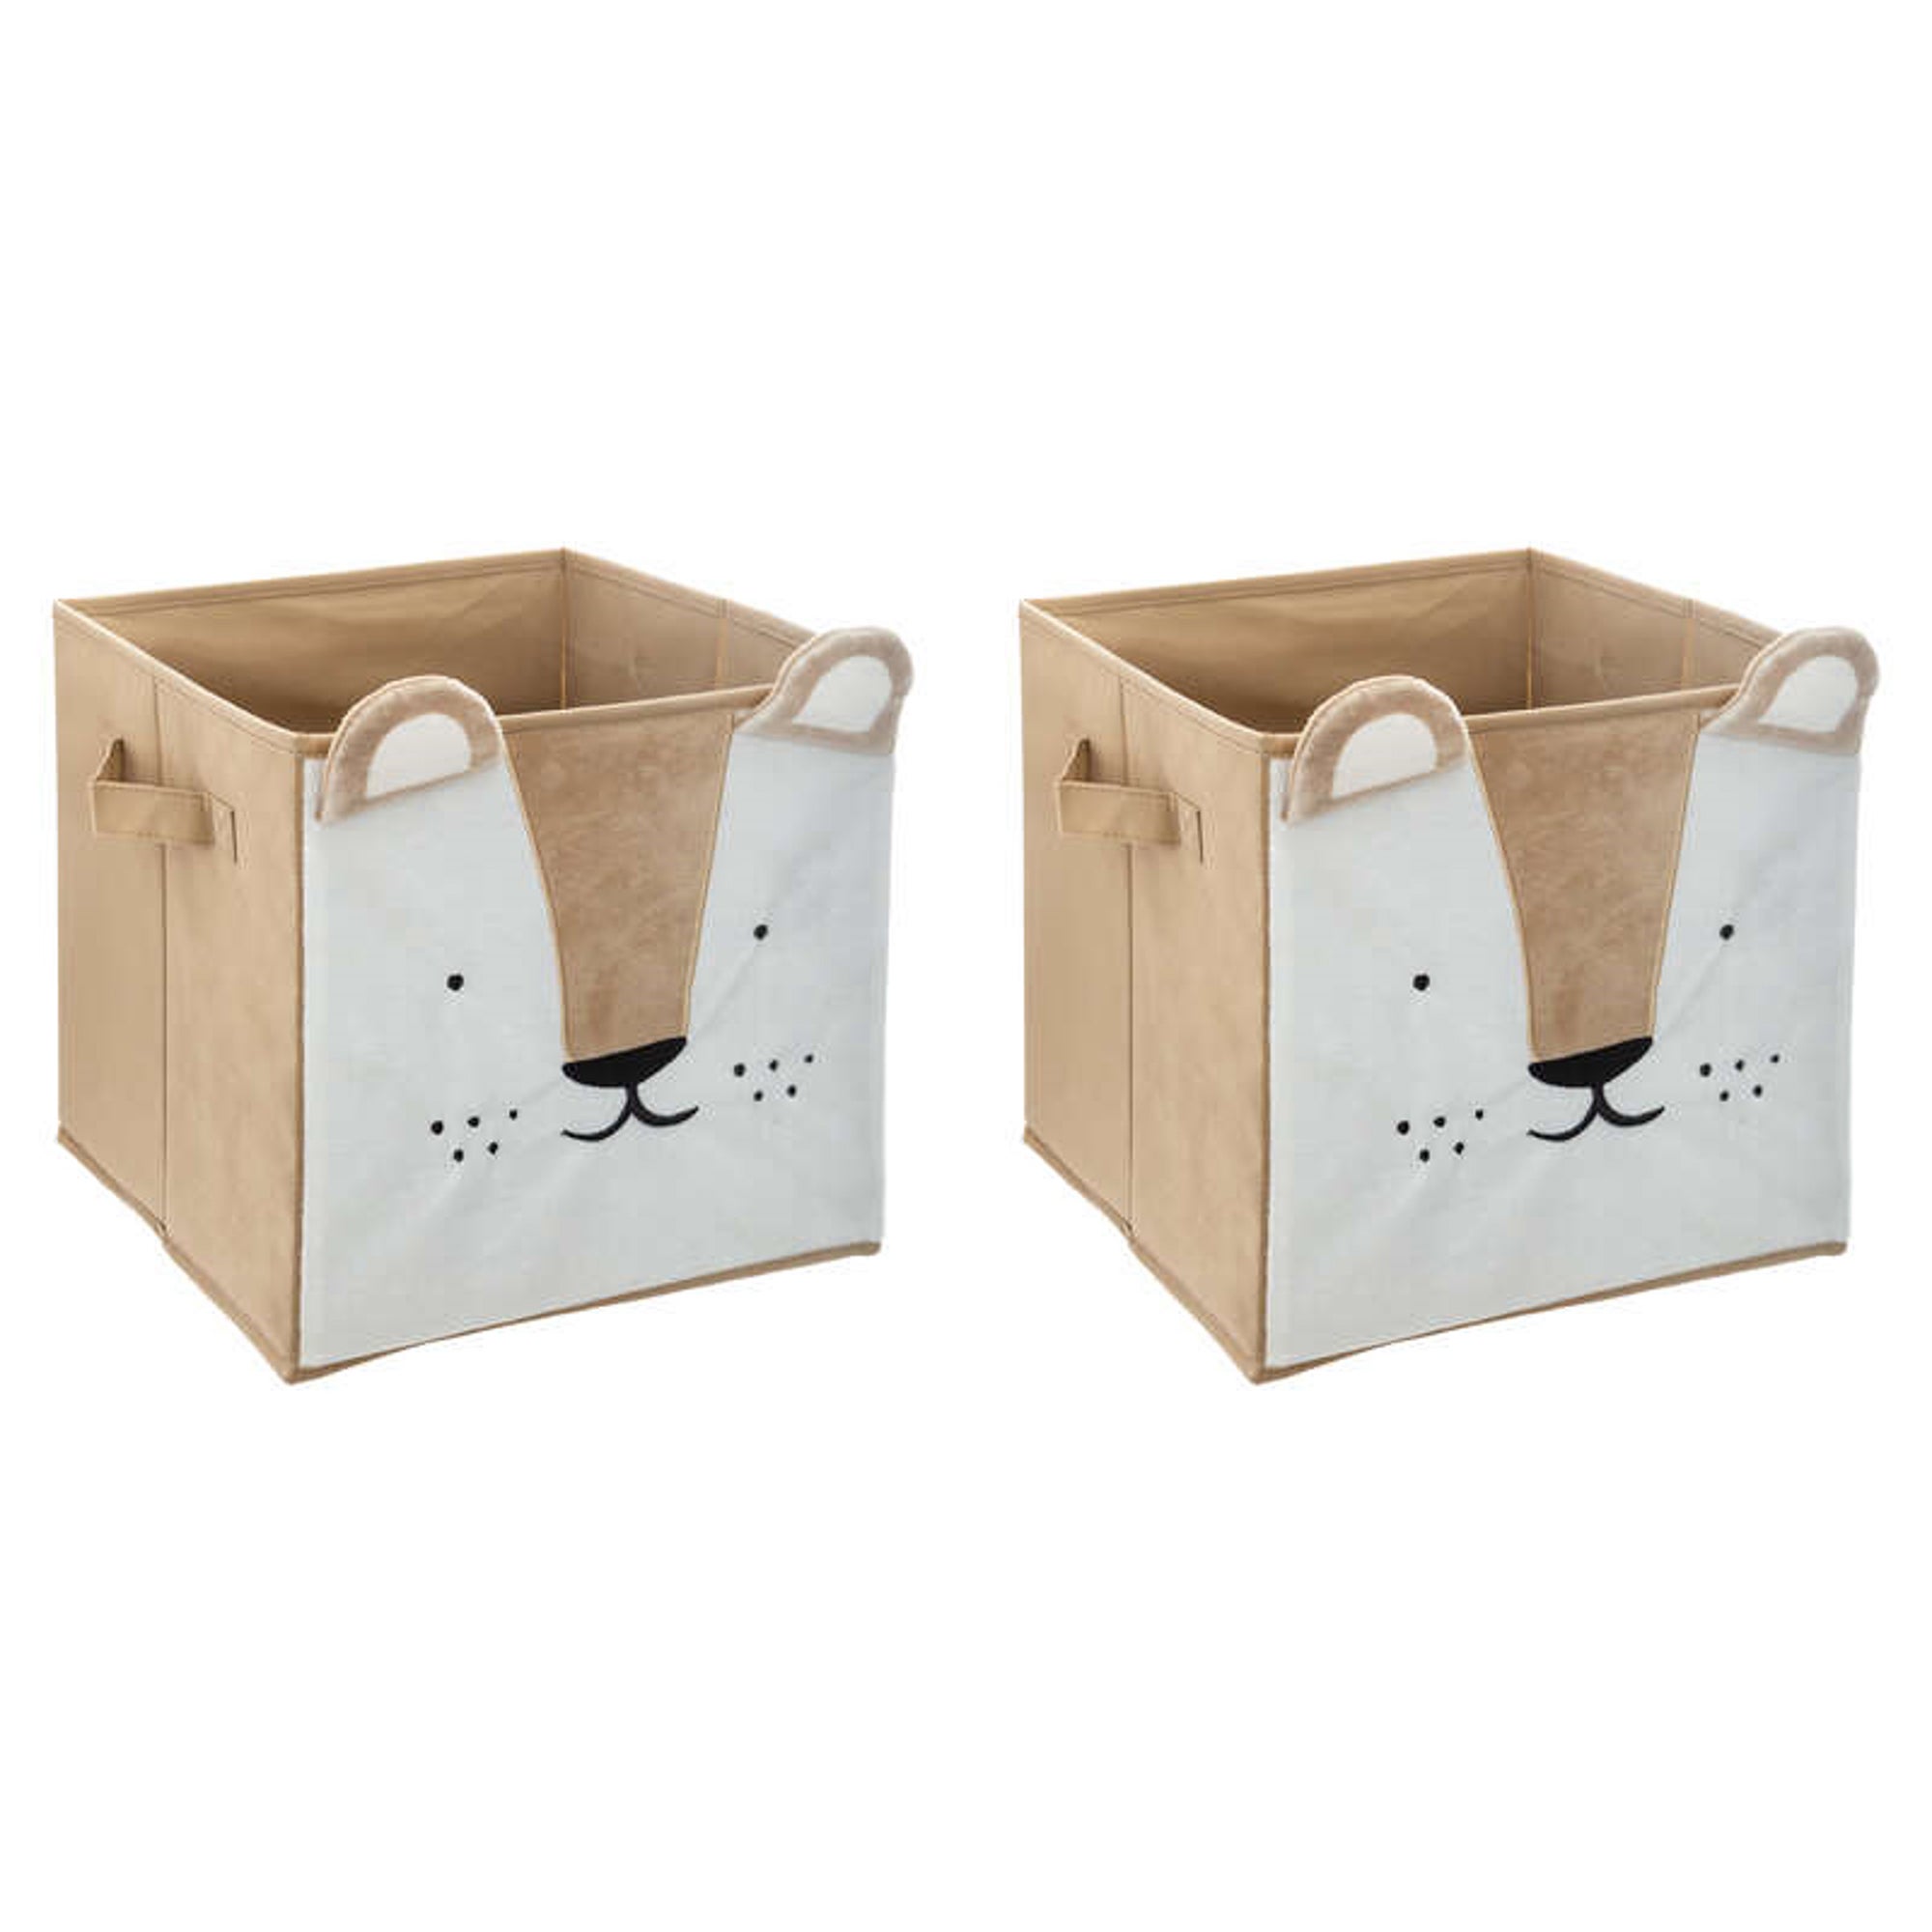 Kids Mix And Modul Set Of 2 Lion Cube Storage Boxes Brown